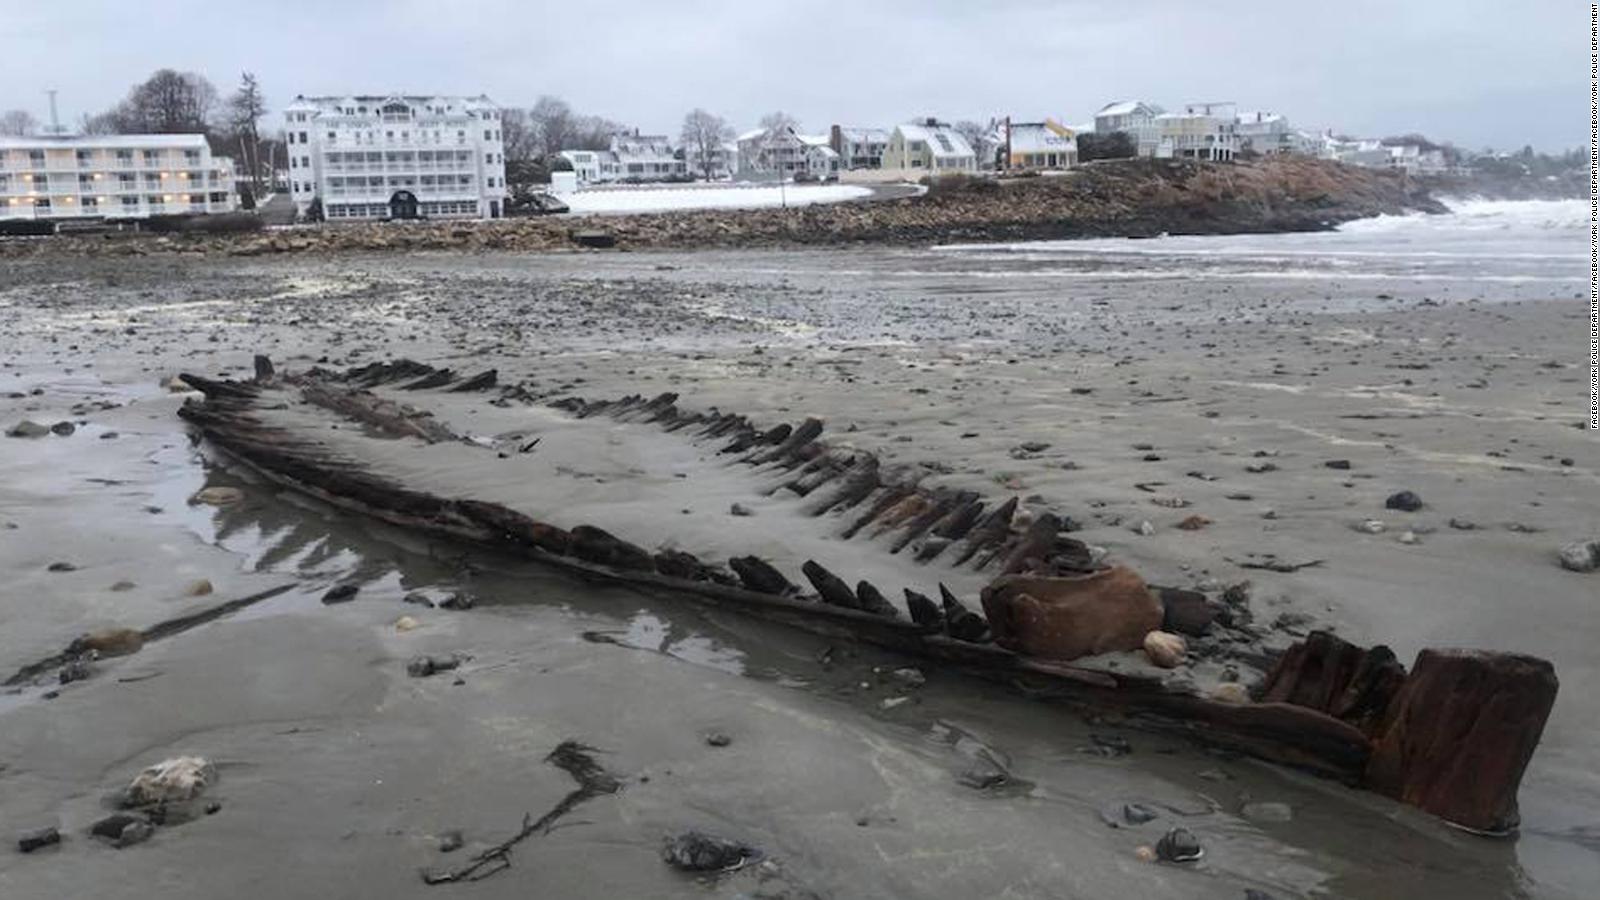 What can we learn from this shipwreck in York, Maine? 